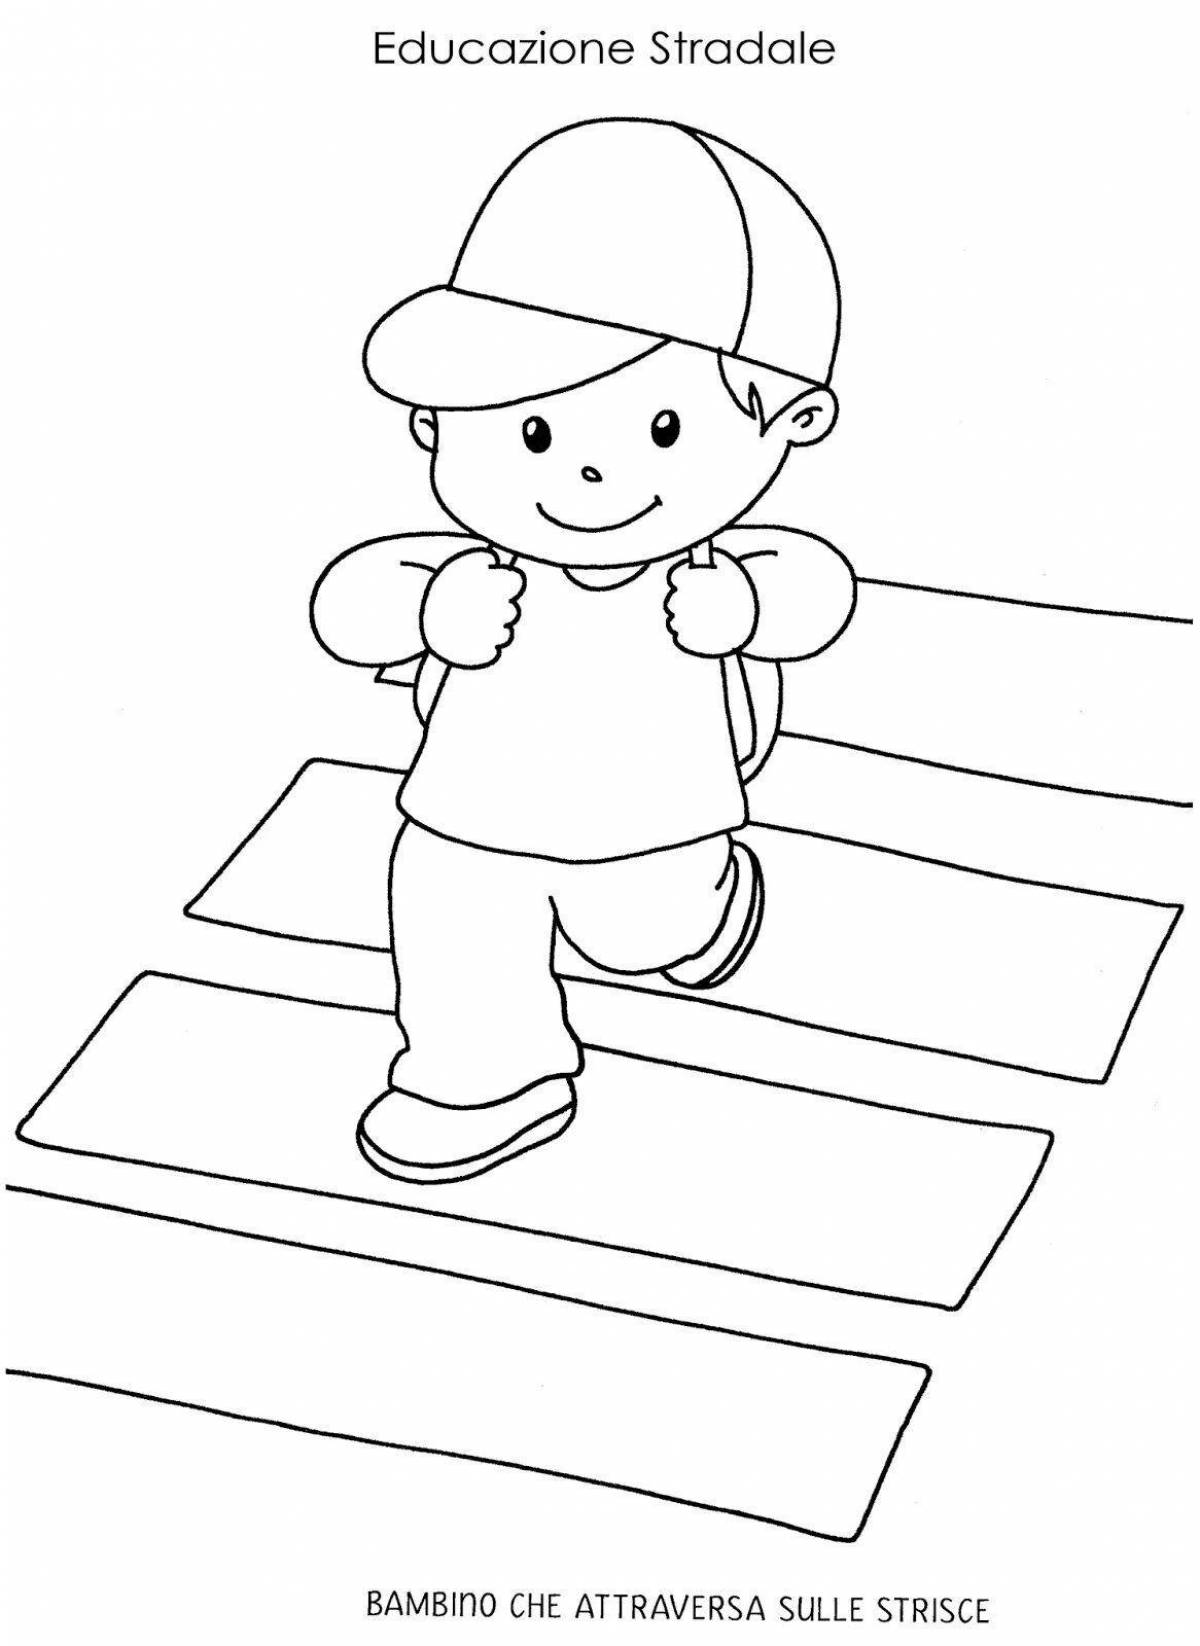 Fun traffic rules coloring page